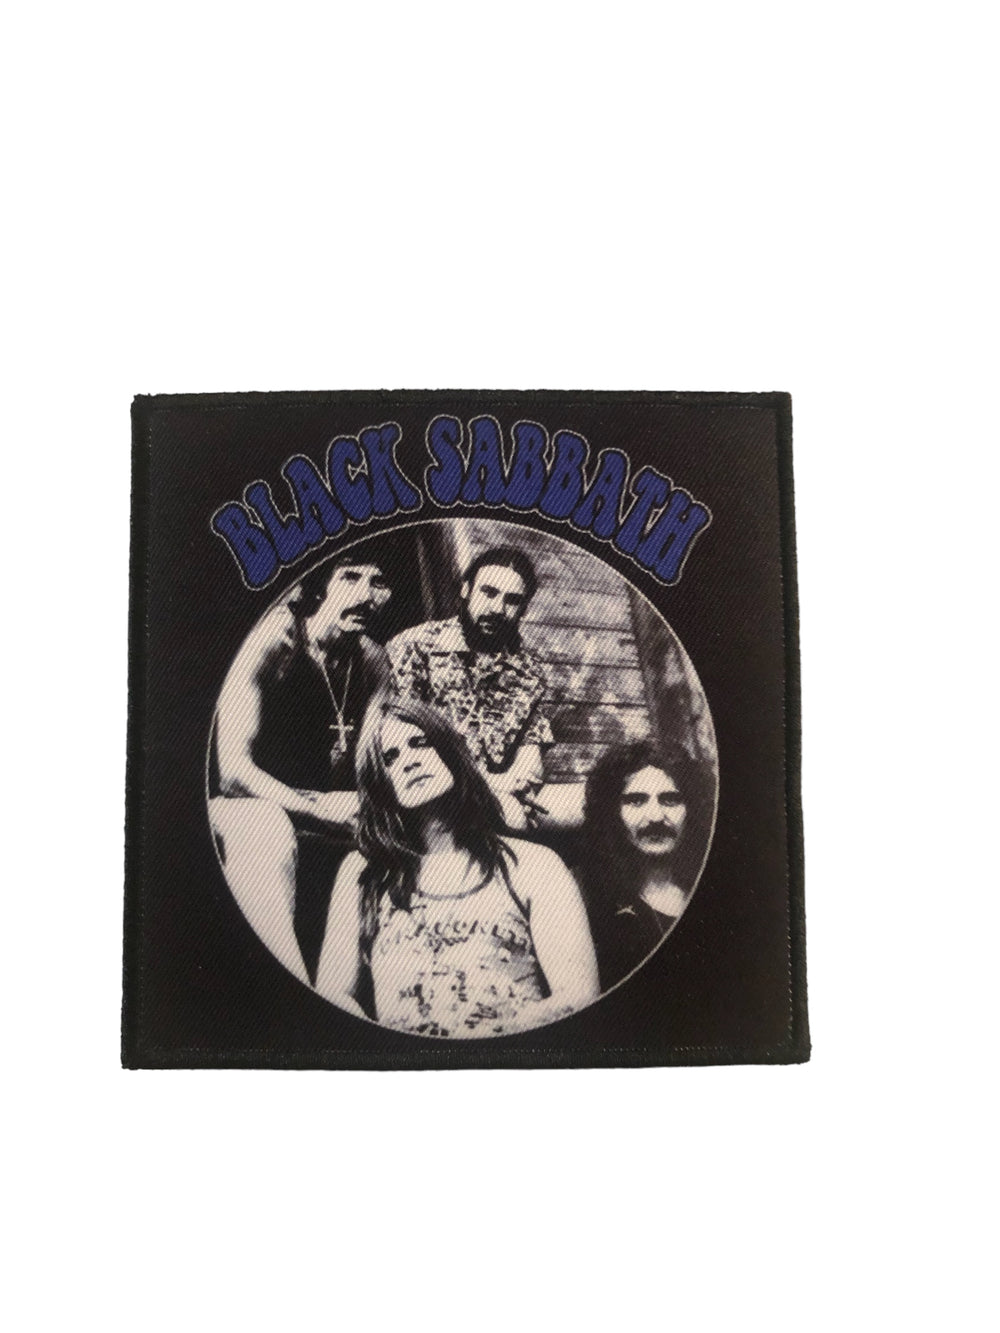 Black Sabbath Standard Woven Patch: Group Image Official New